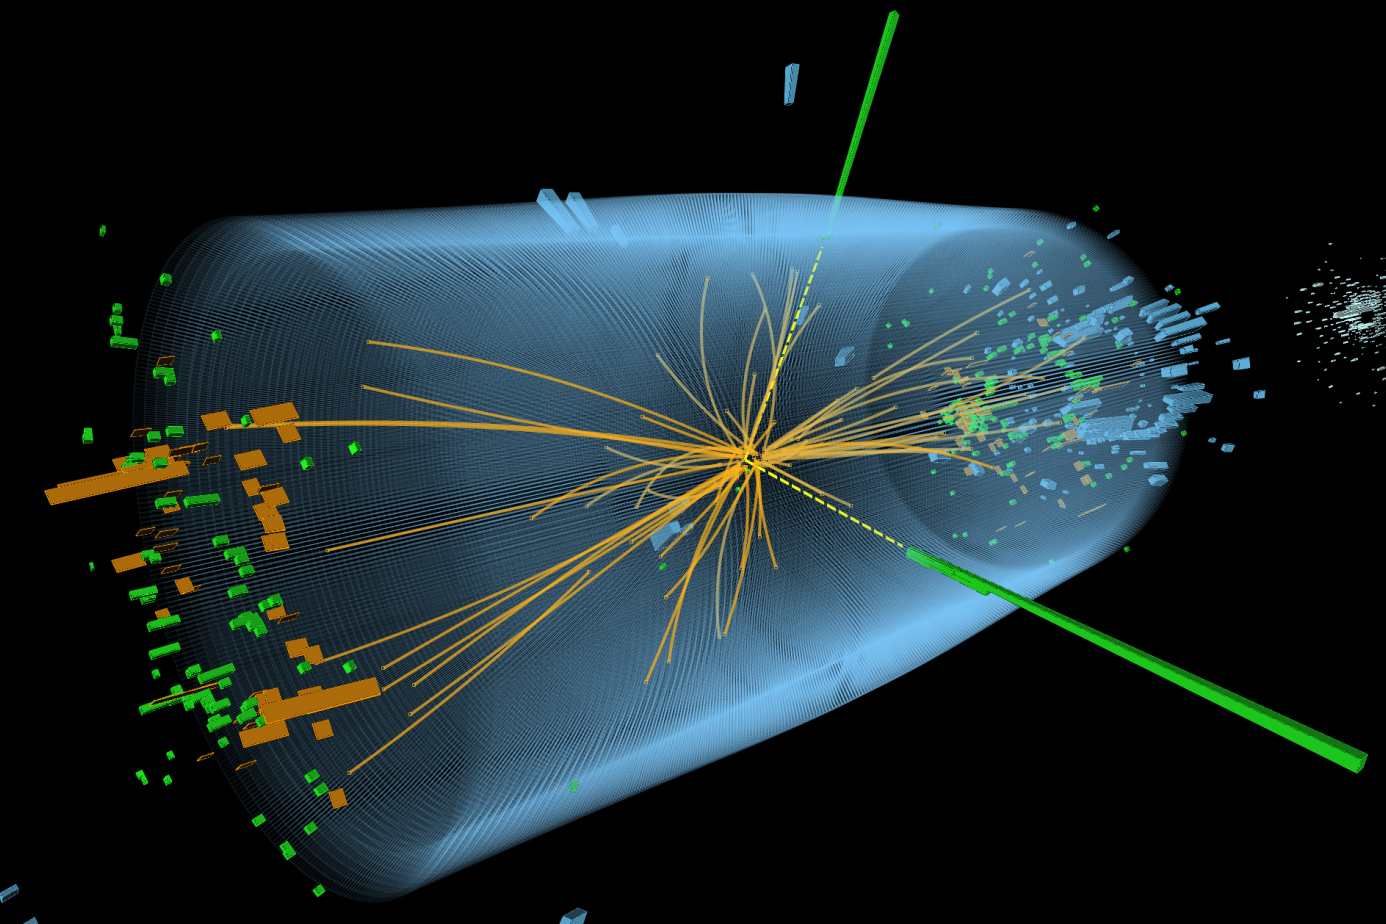 Event recorded with the CMS detector in 2012 at a proton-proton center of mass energy of 8 TeV. The event shows characteristics expected from the decay of the SM Higgs boson to a pair of photons (dashed yellow lines and green towers).